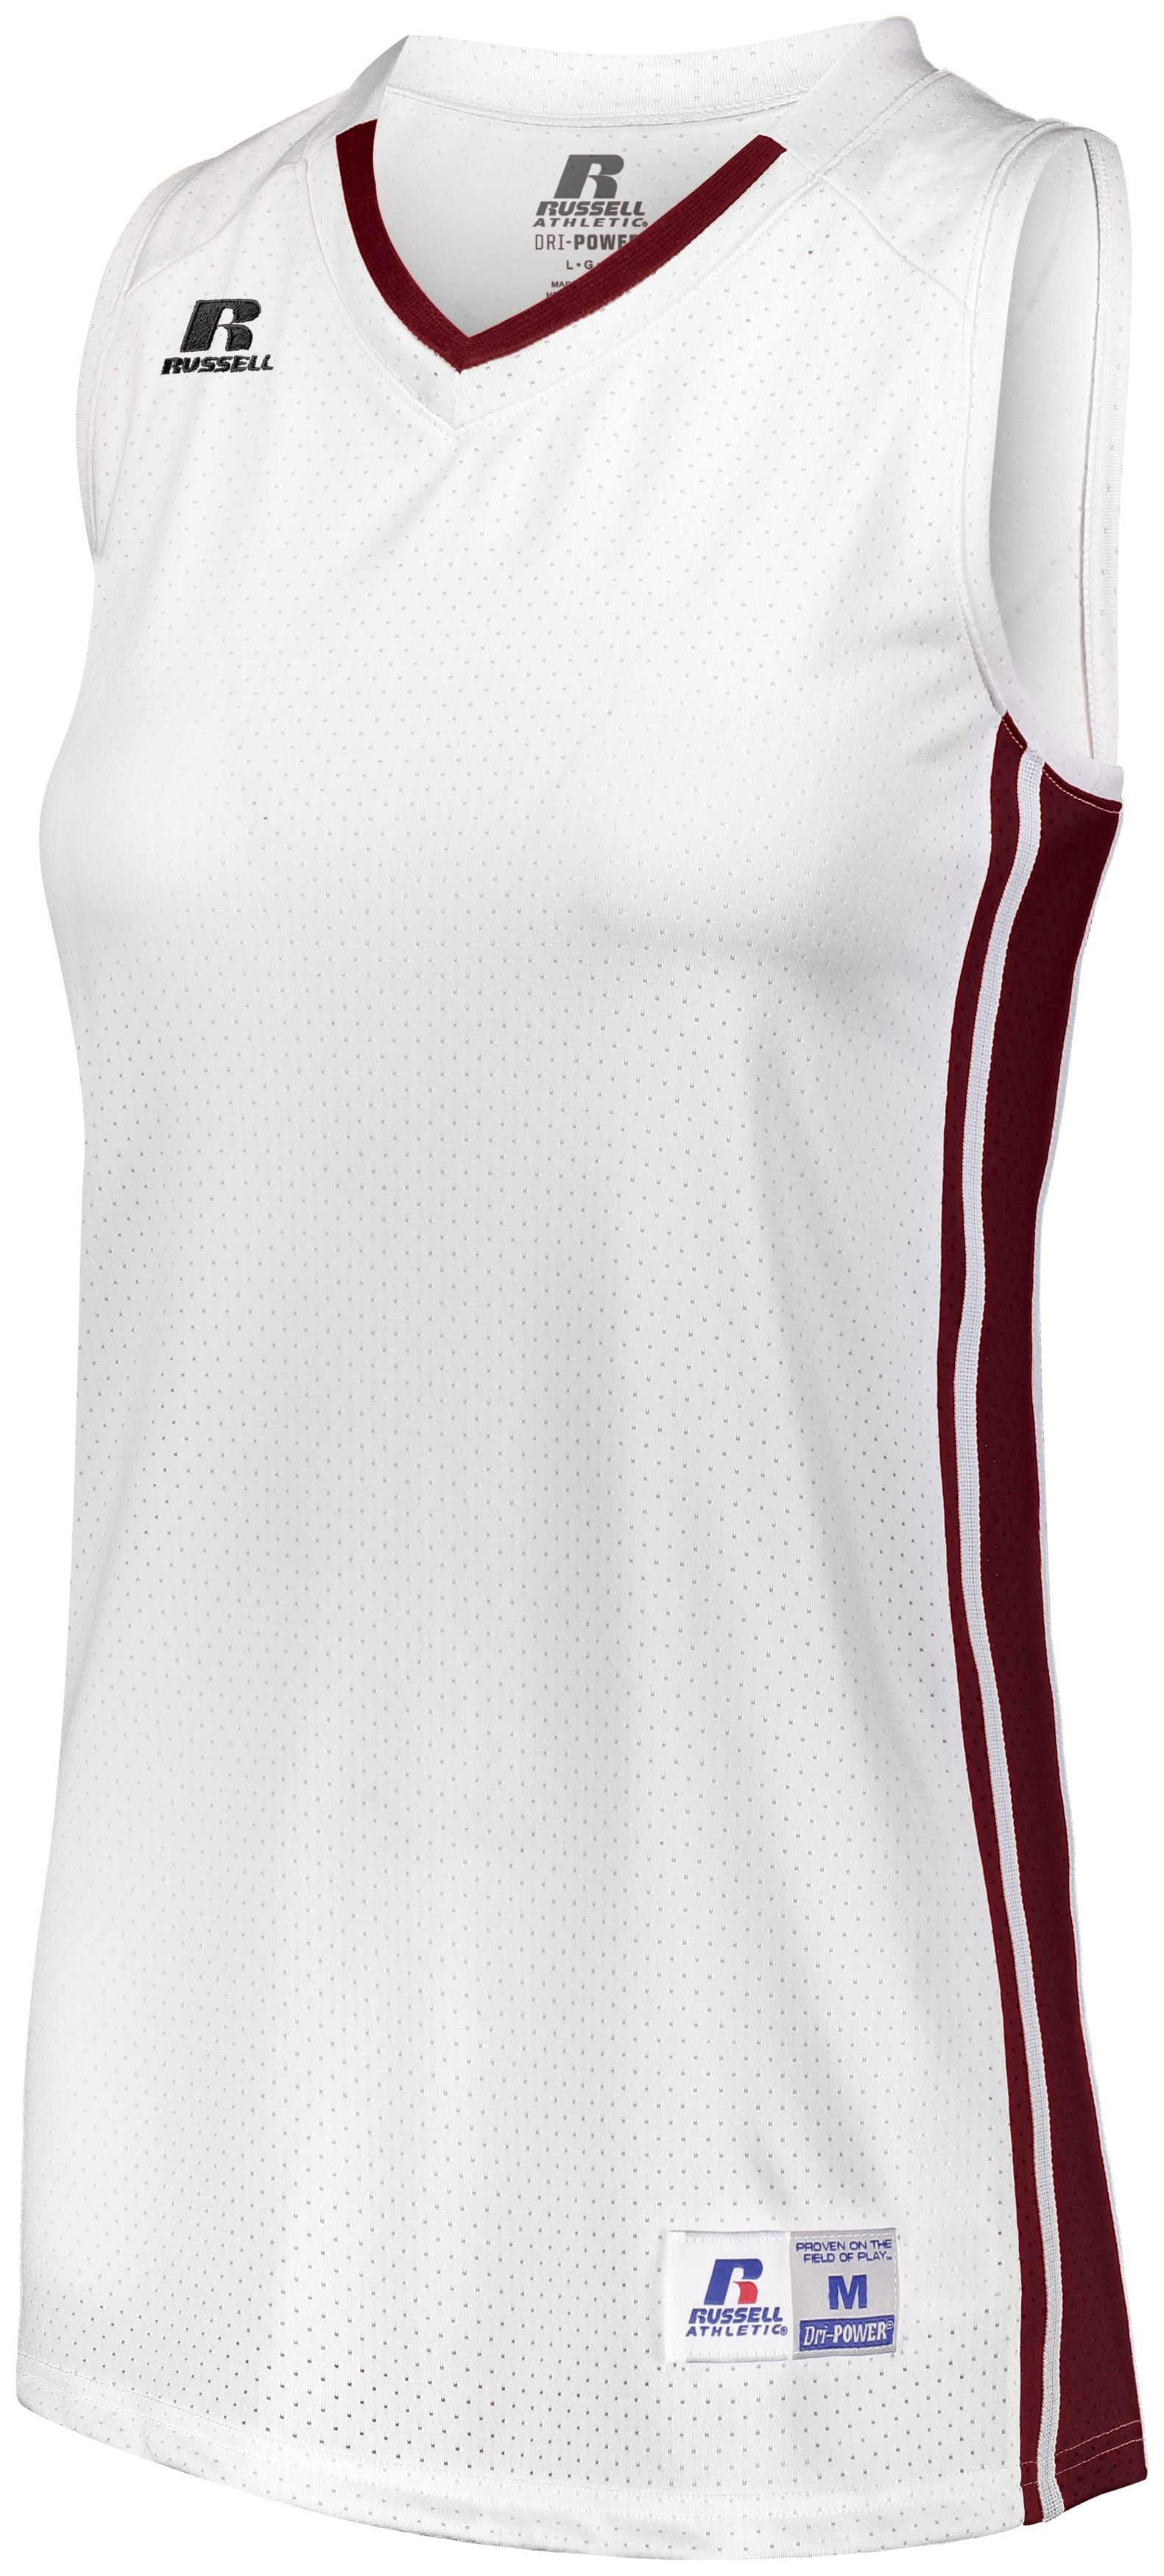 Russell Athletic Ladies Legacy Basketball Jersey in White/Cardinal  -Part of the Ladies, Ladies-Jersey, Basketball, Russell-Athletic-Products, Shirts, All-Sports, All-Sports-1 product lines at KanaleyCreations.com